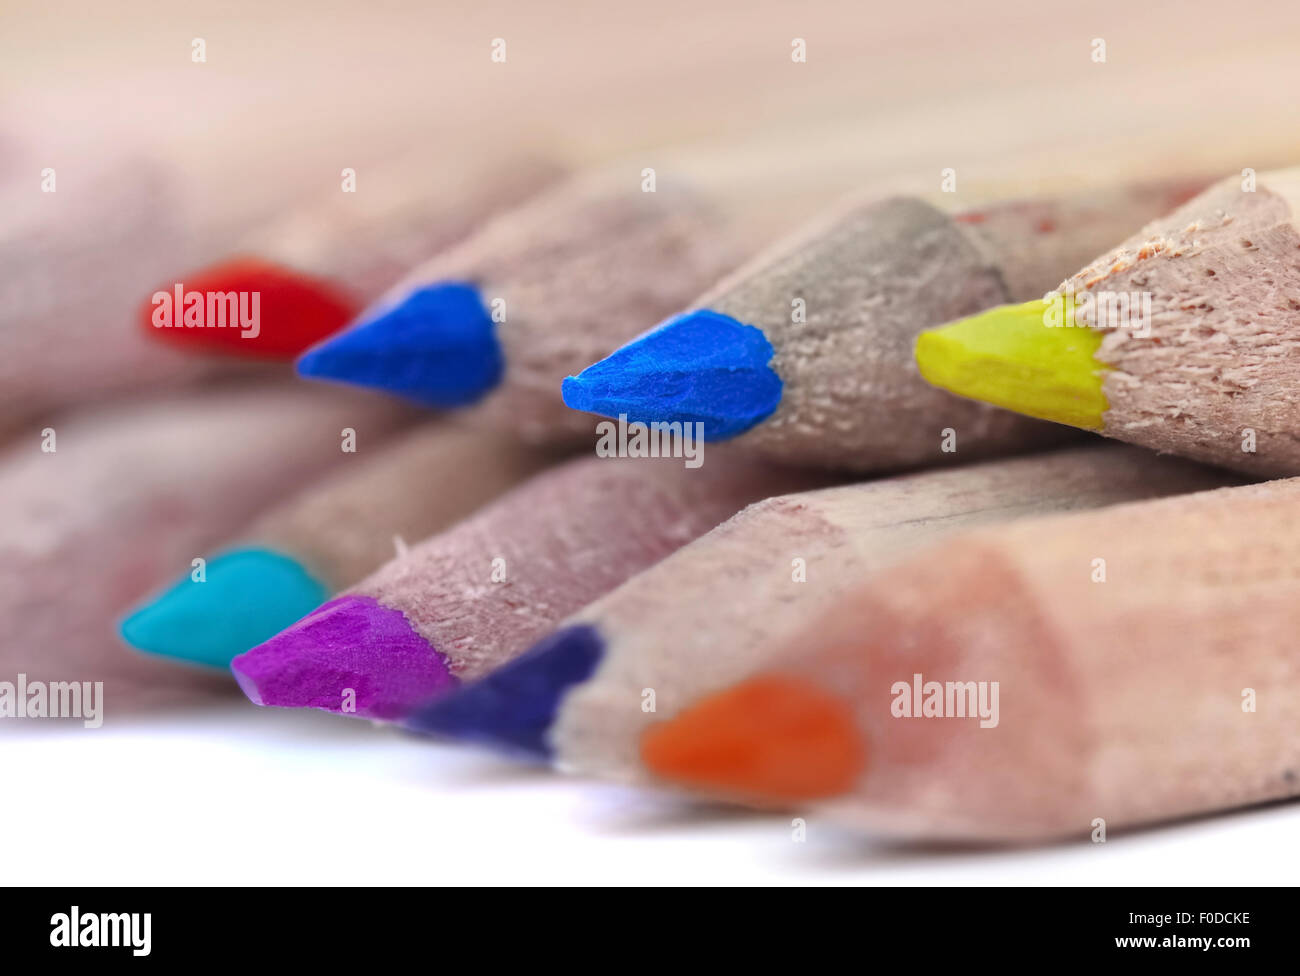 close on colorful lead pencils on white background Stock Photo